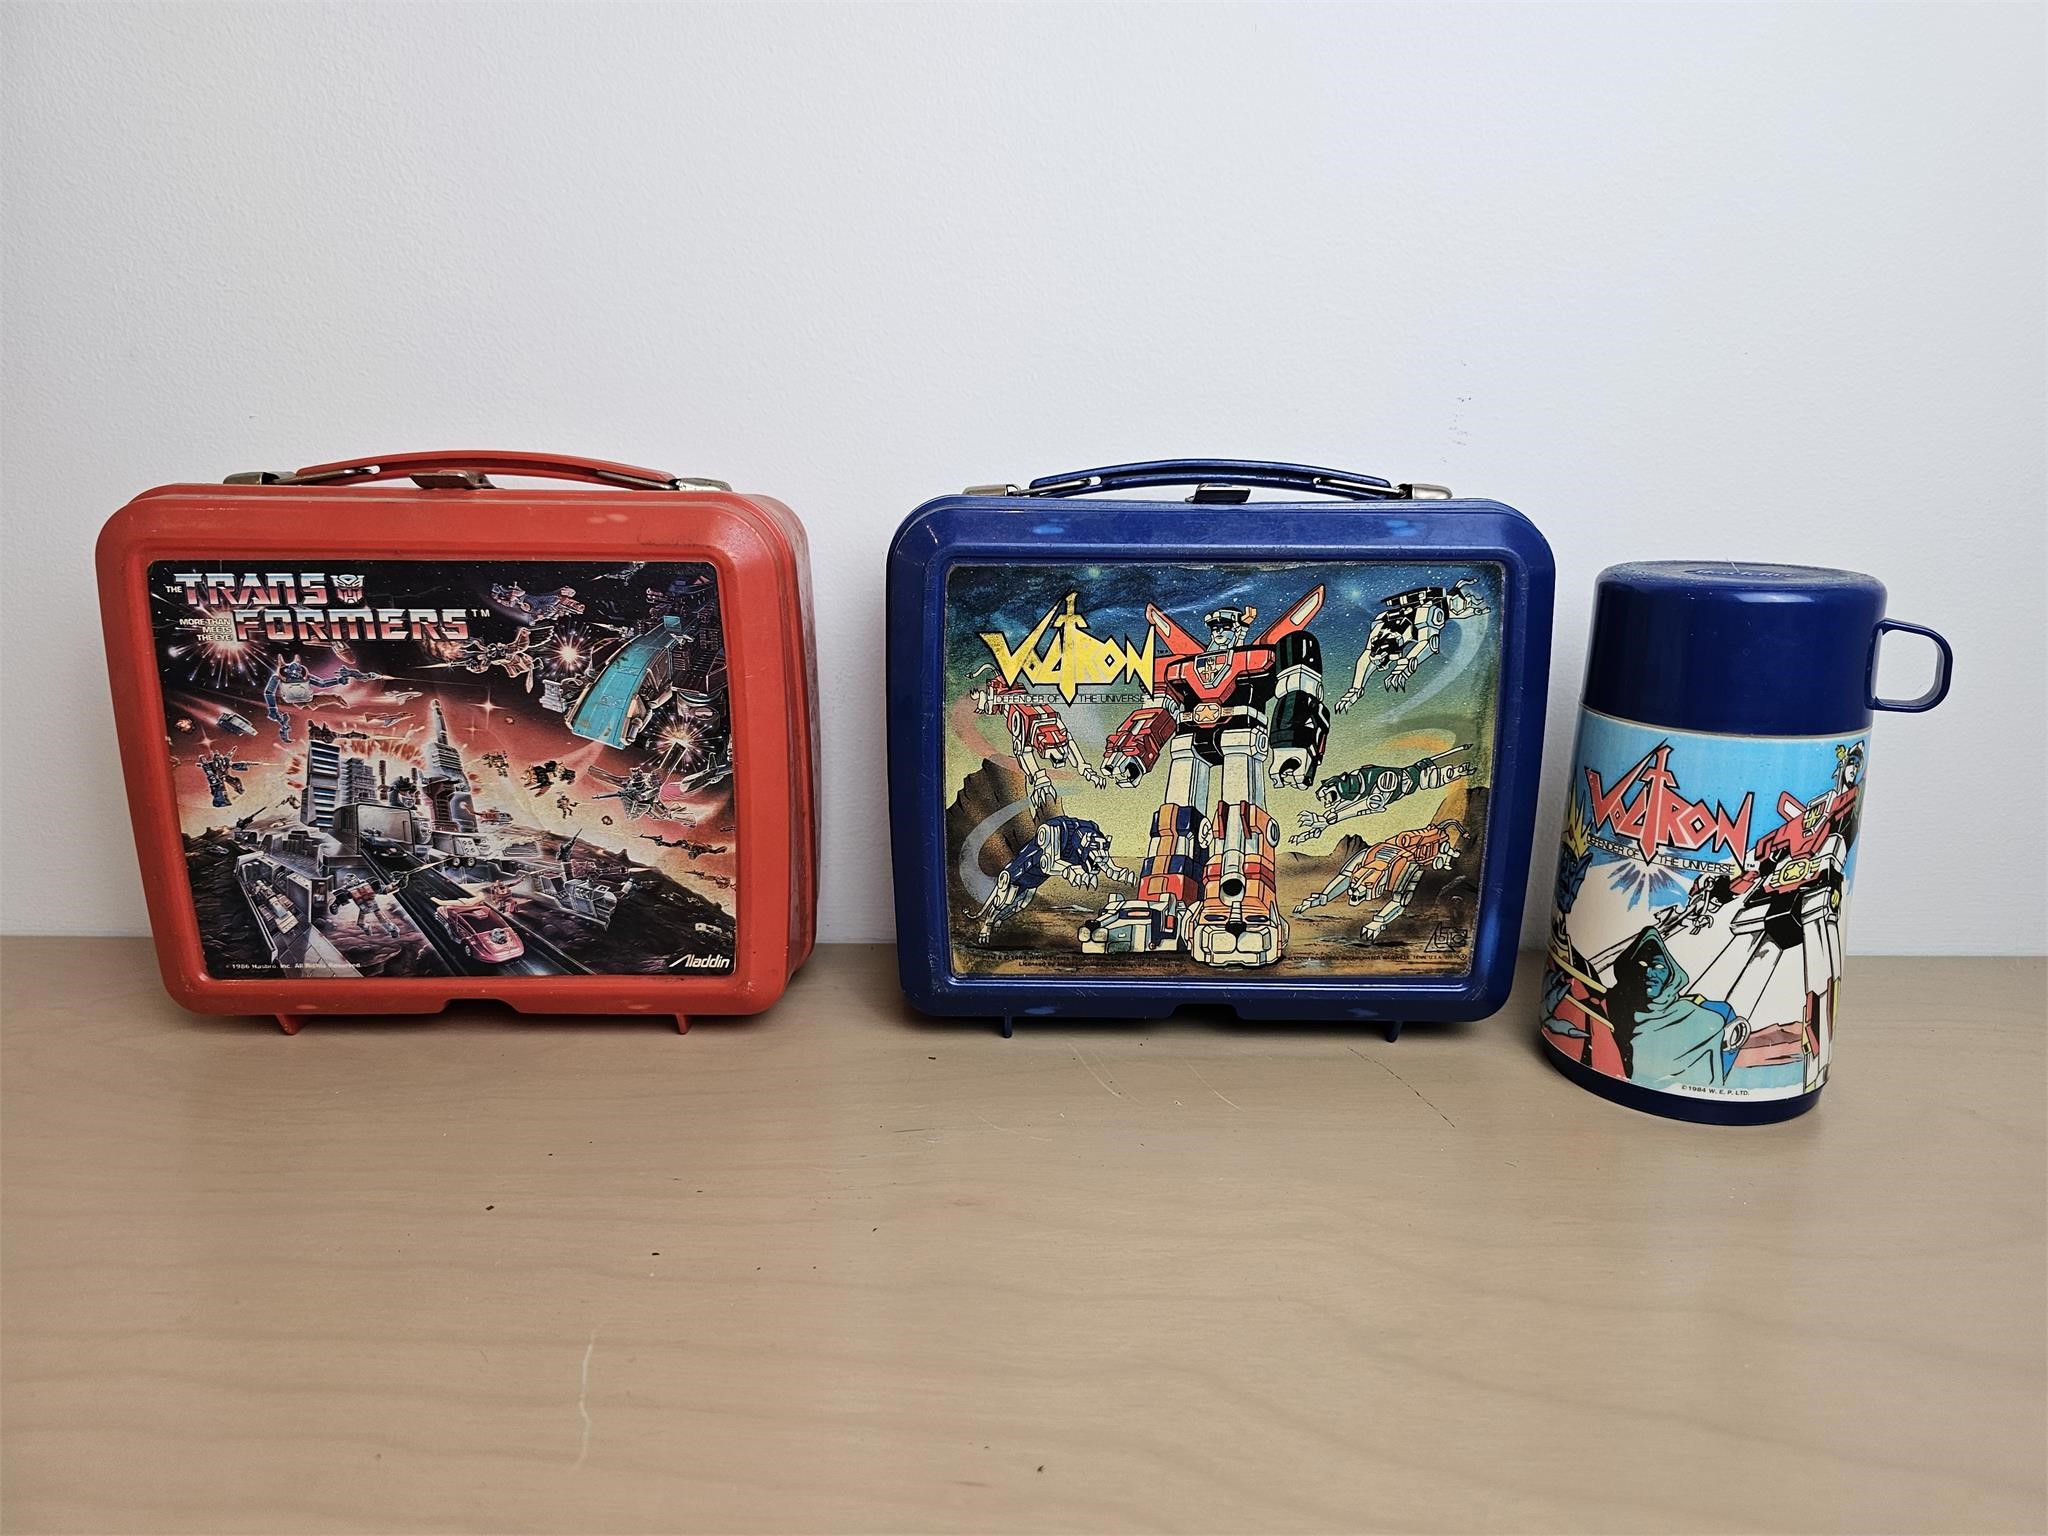 vintage alladin lunch boxes, 1 thermos